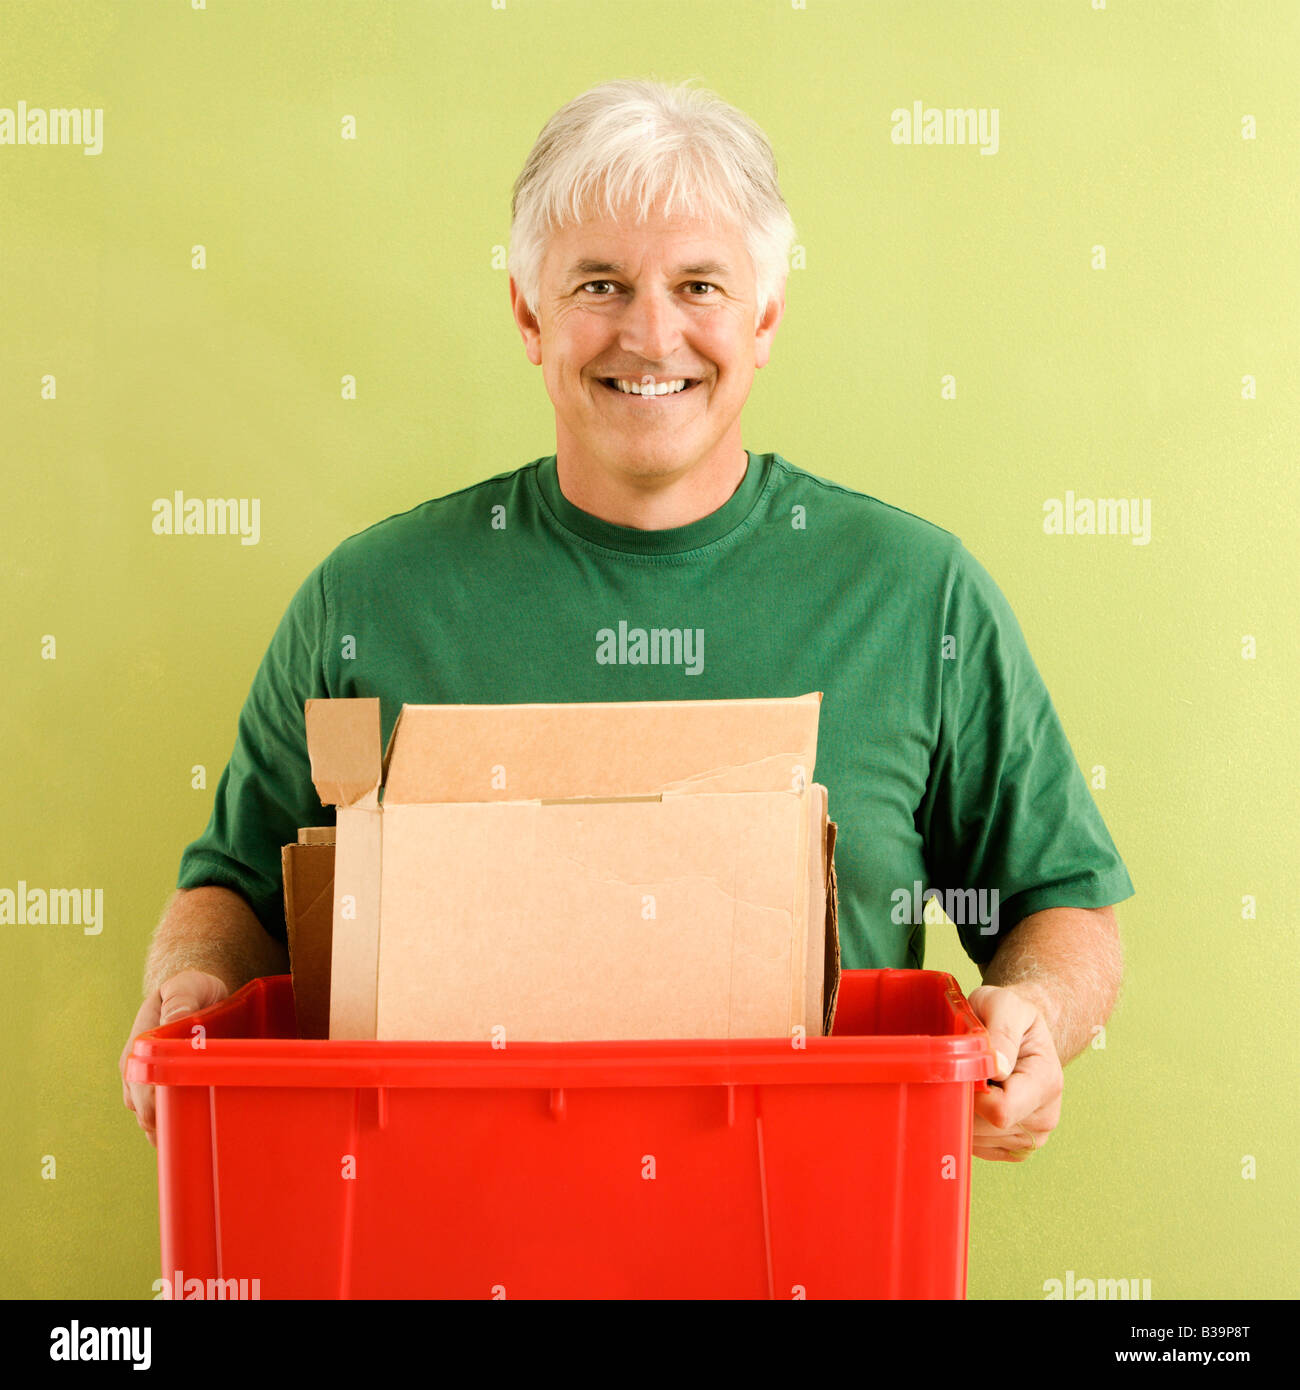 Portrait of smiling adult man holding recycling bin full of cardboard Stock Photo